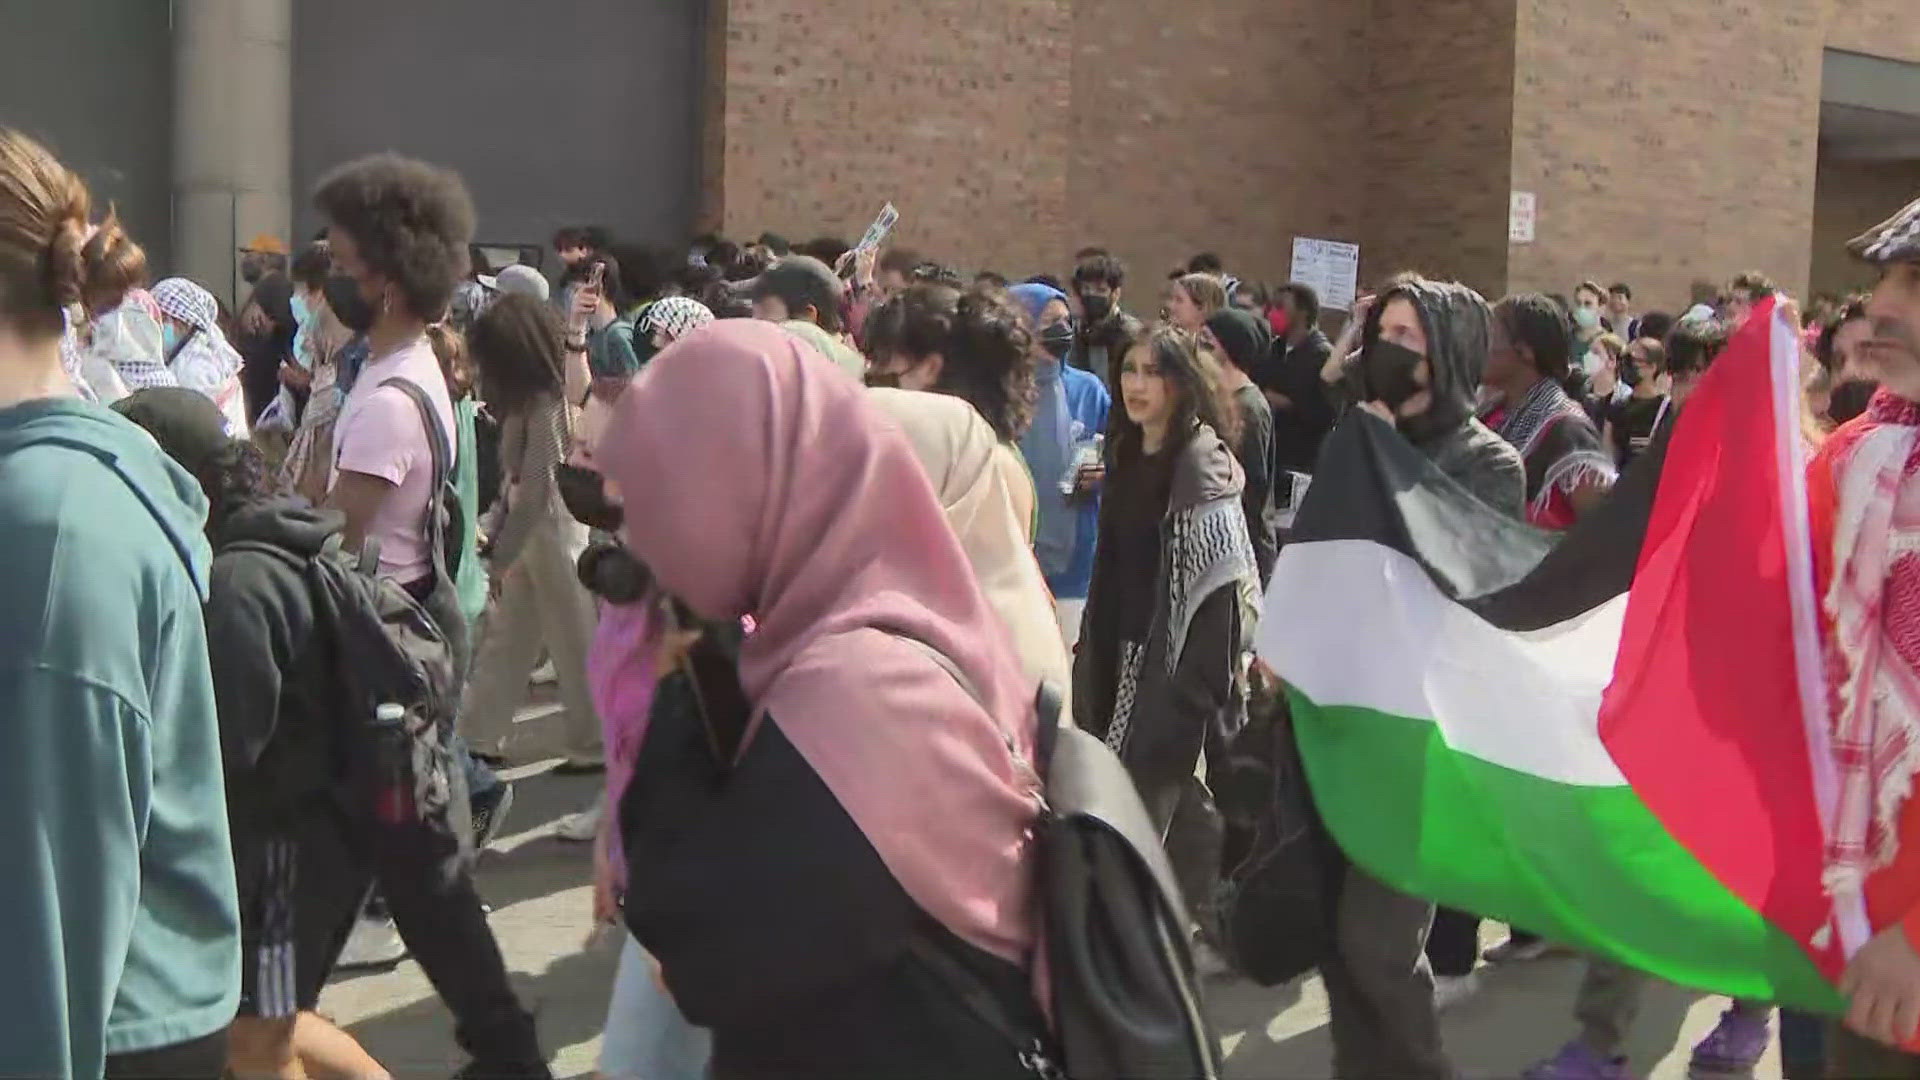 A pro-Palestine event is underway at University at Buffalo for a third consecutive day.